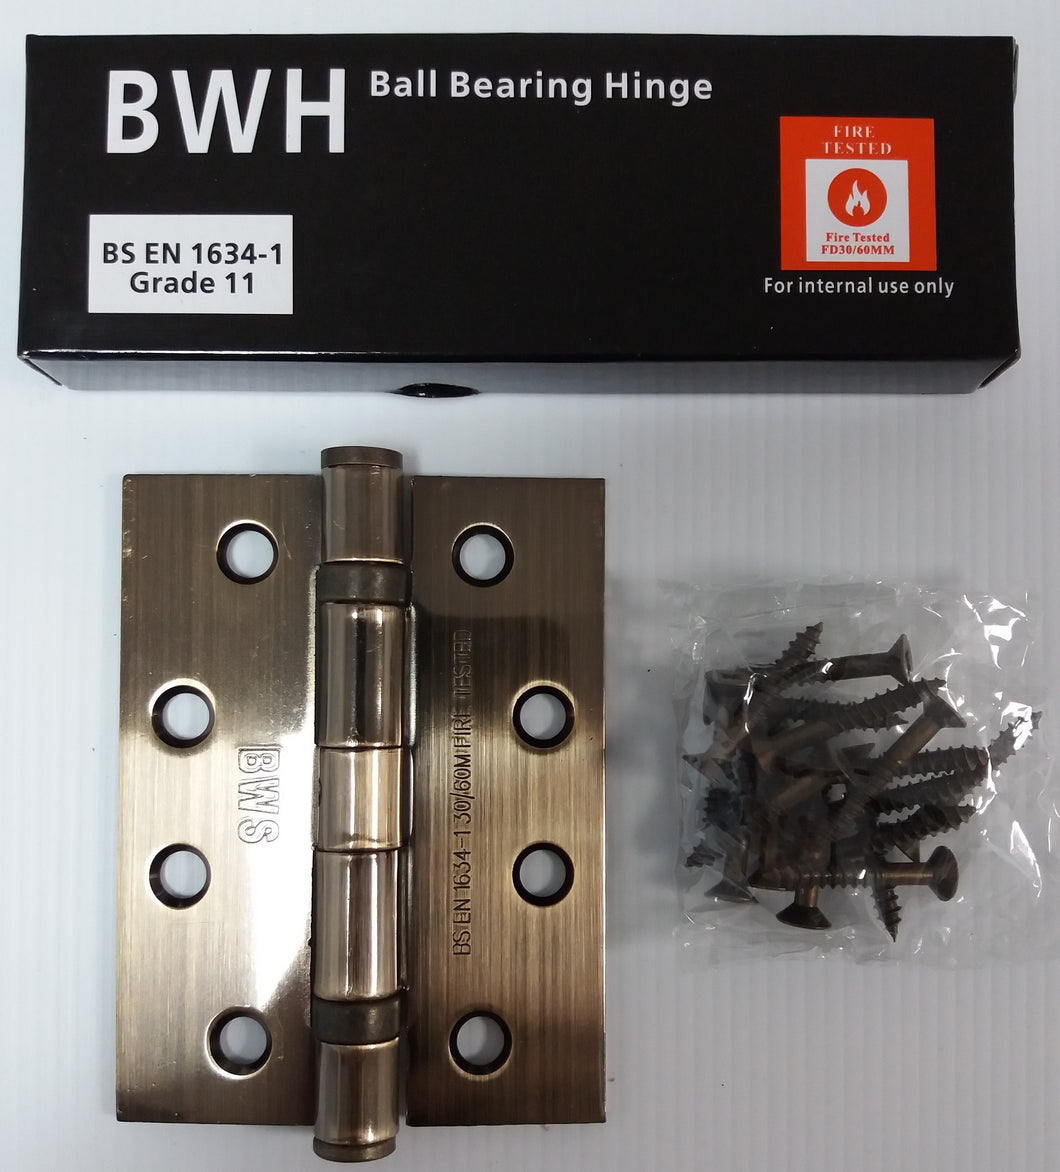 BWH 100MM BRONZE BALL BEARING HINGE GRADE 11 STEEL 1HR FIRE RATED (2 PACK)